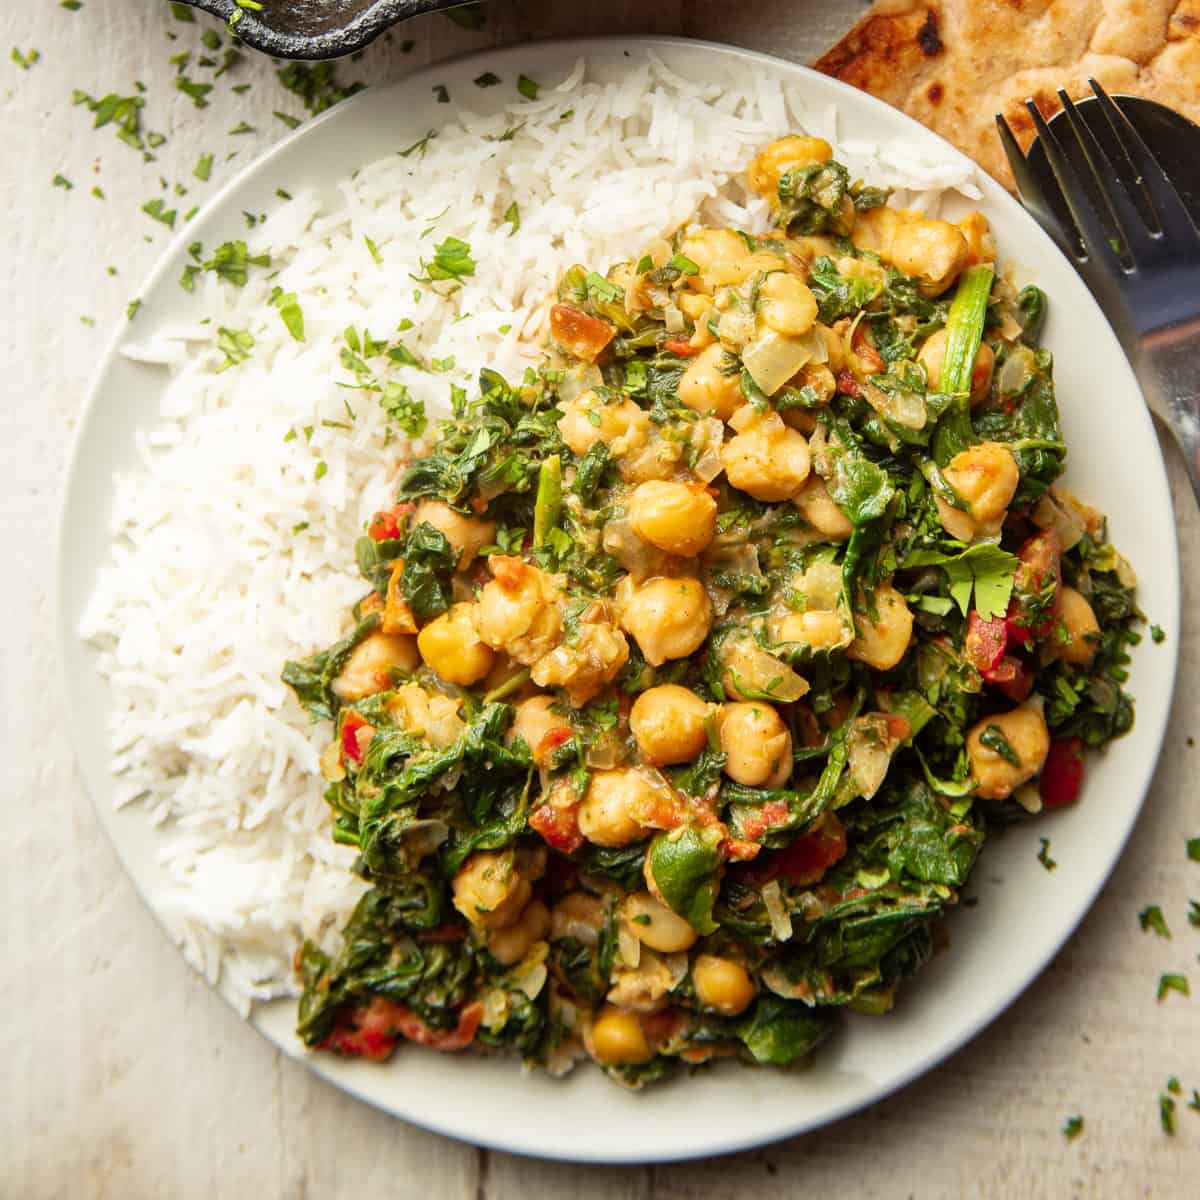 Plate of Chickpea & Spinach Curry over rice.